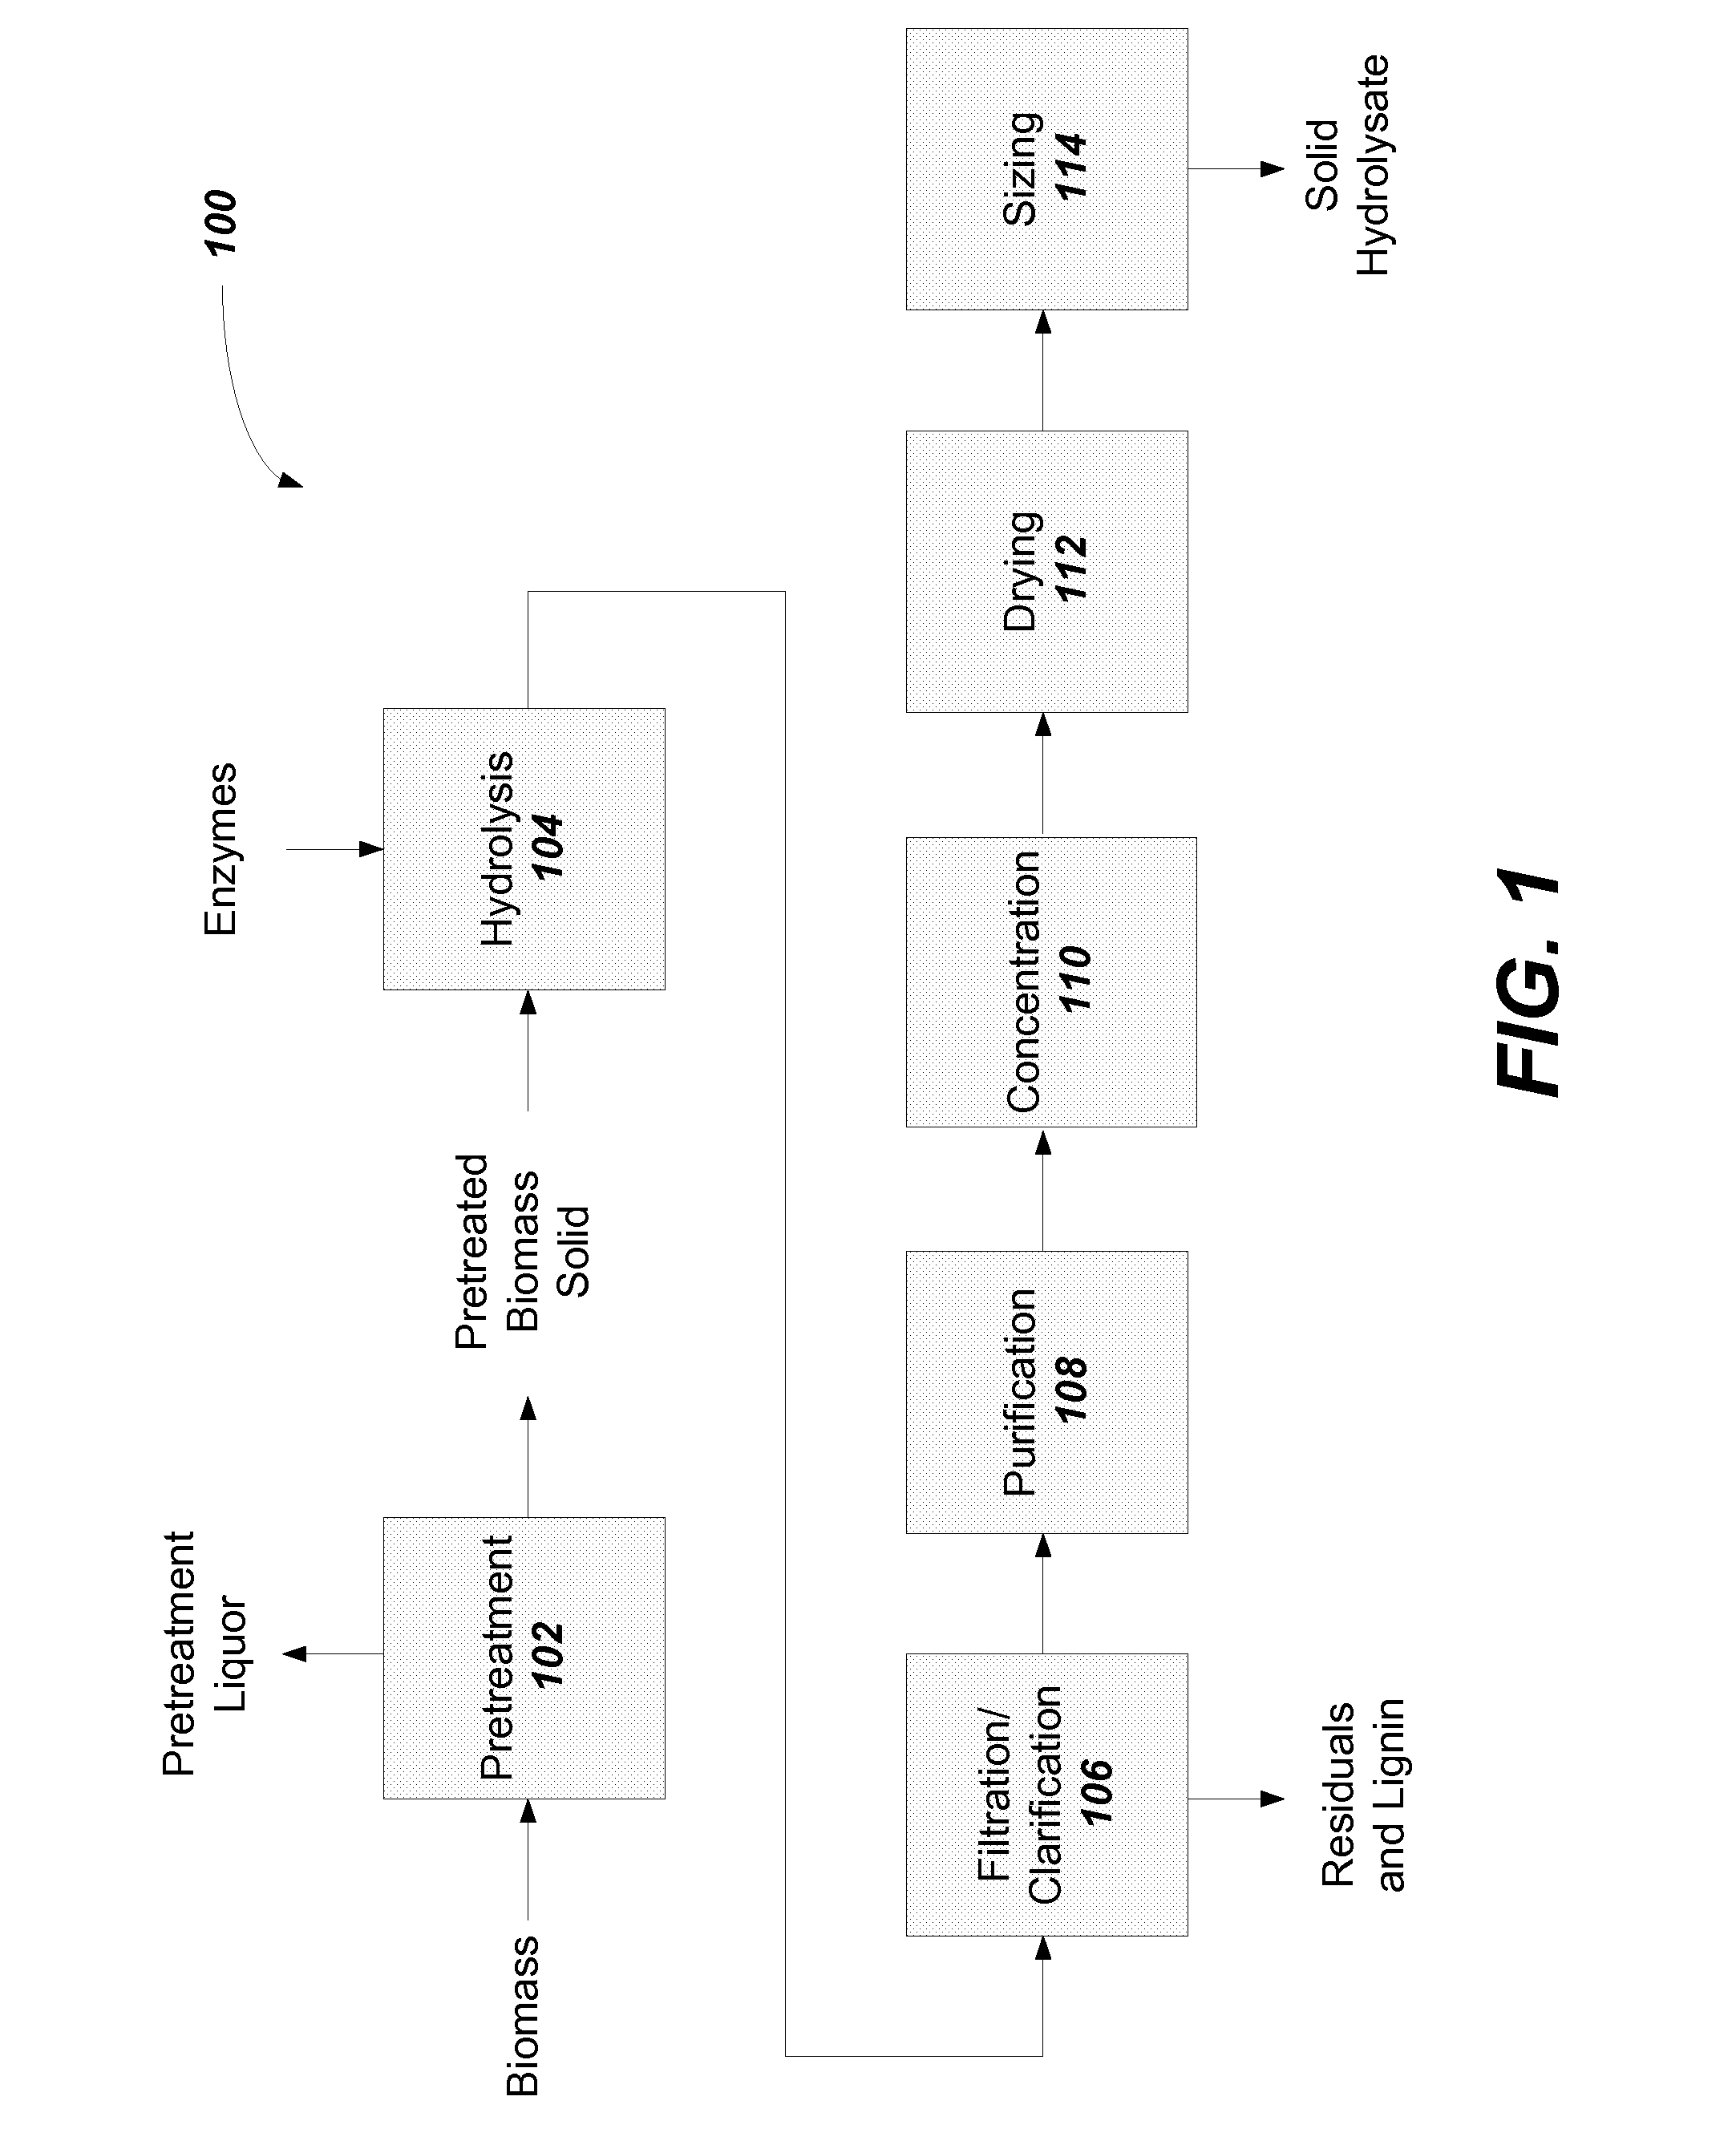 Solid lignocellulosic hydrolysate and methods to prepare a solid lignocellulosic hydrolysate